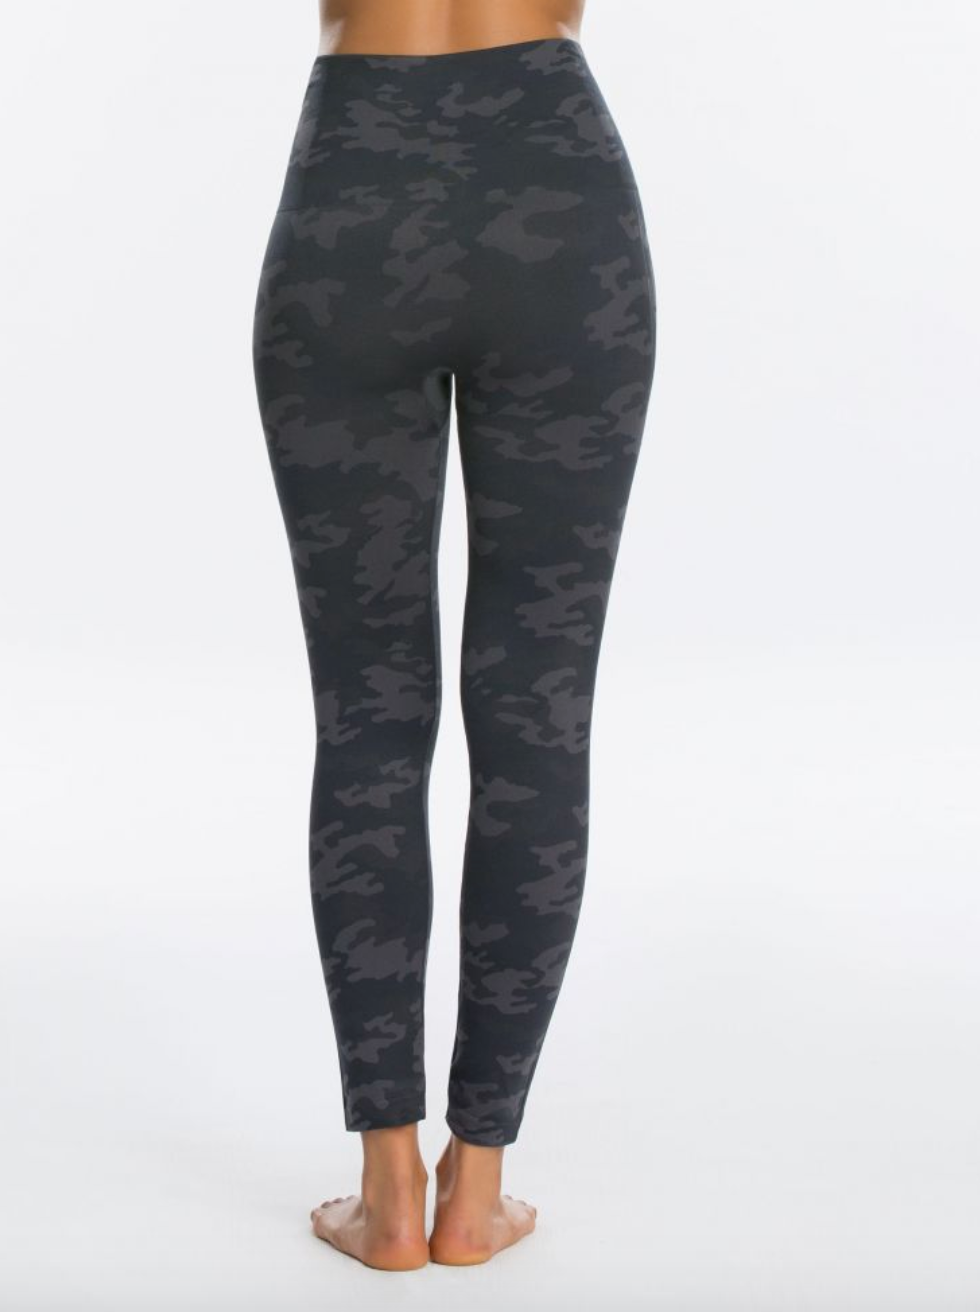 SPANX Solid Black Leggings Size M - 63% off